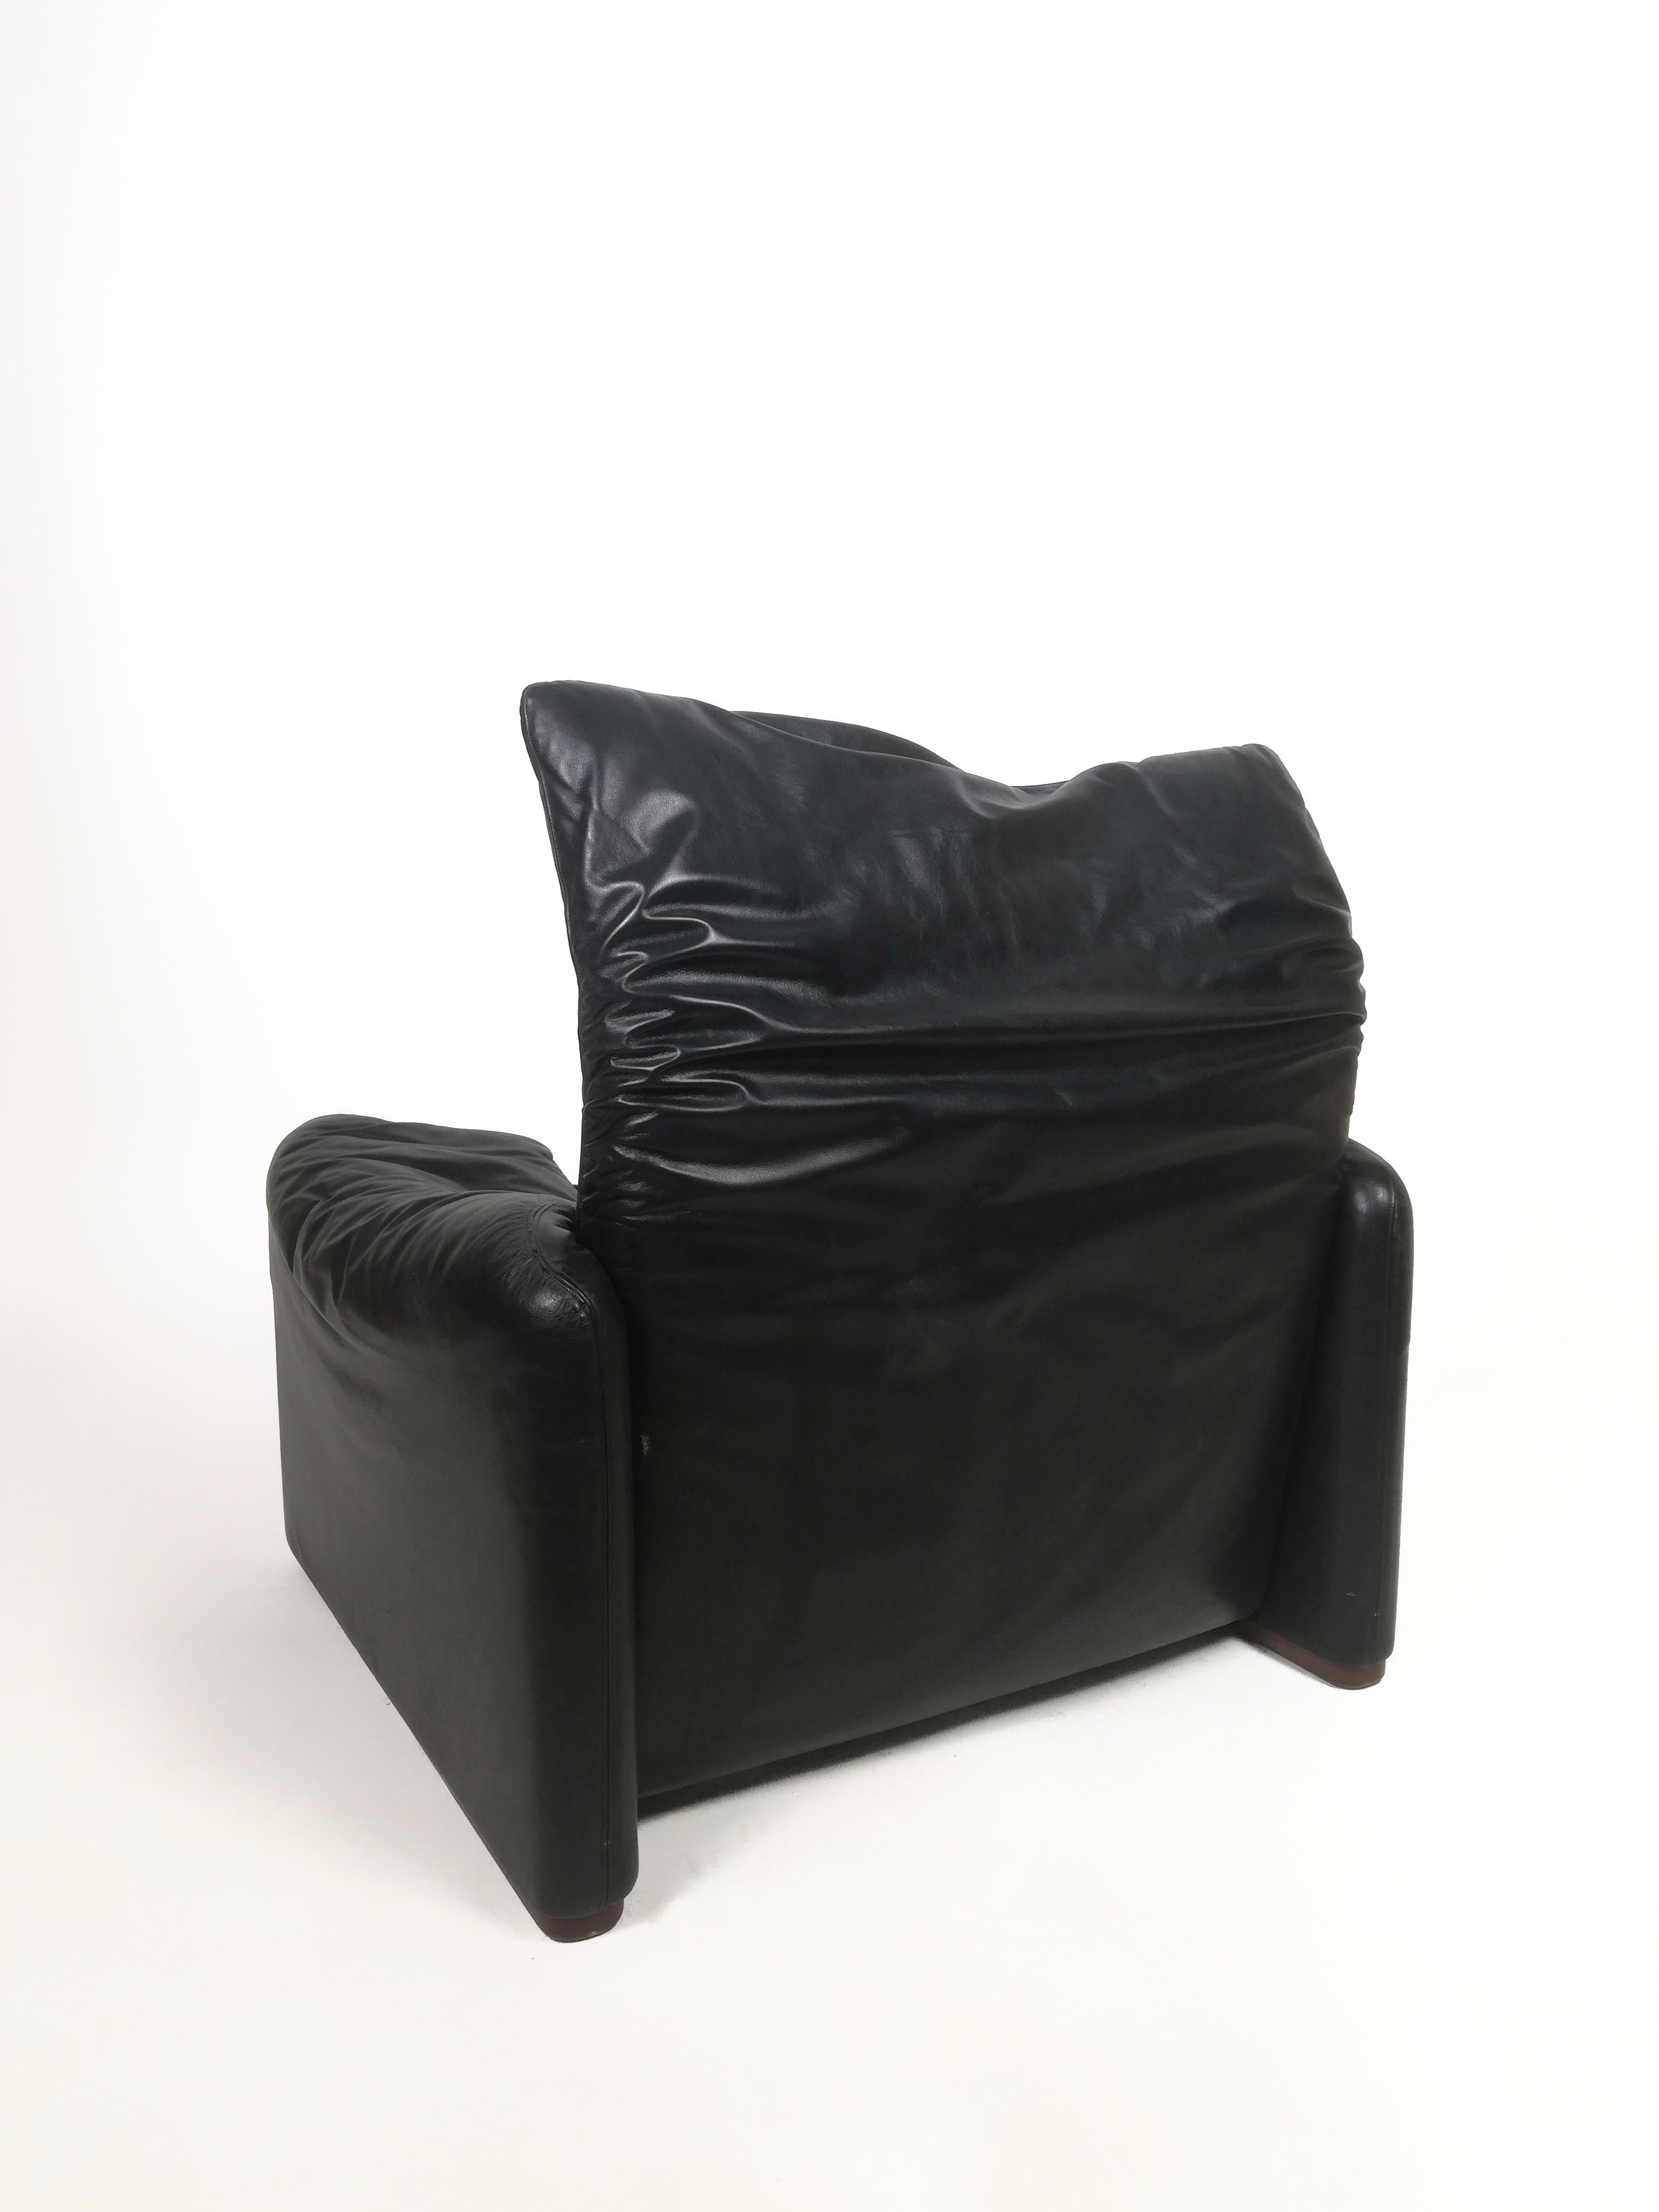 Set of Two Maralunga Black Leather Armchairs by Vico Magistretti For Sale 4